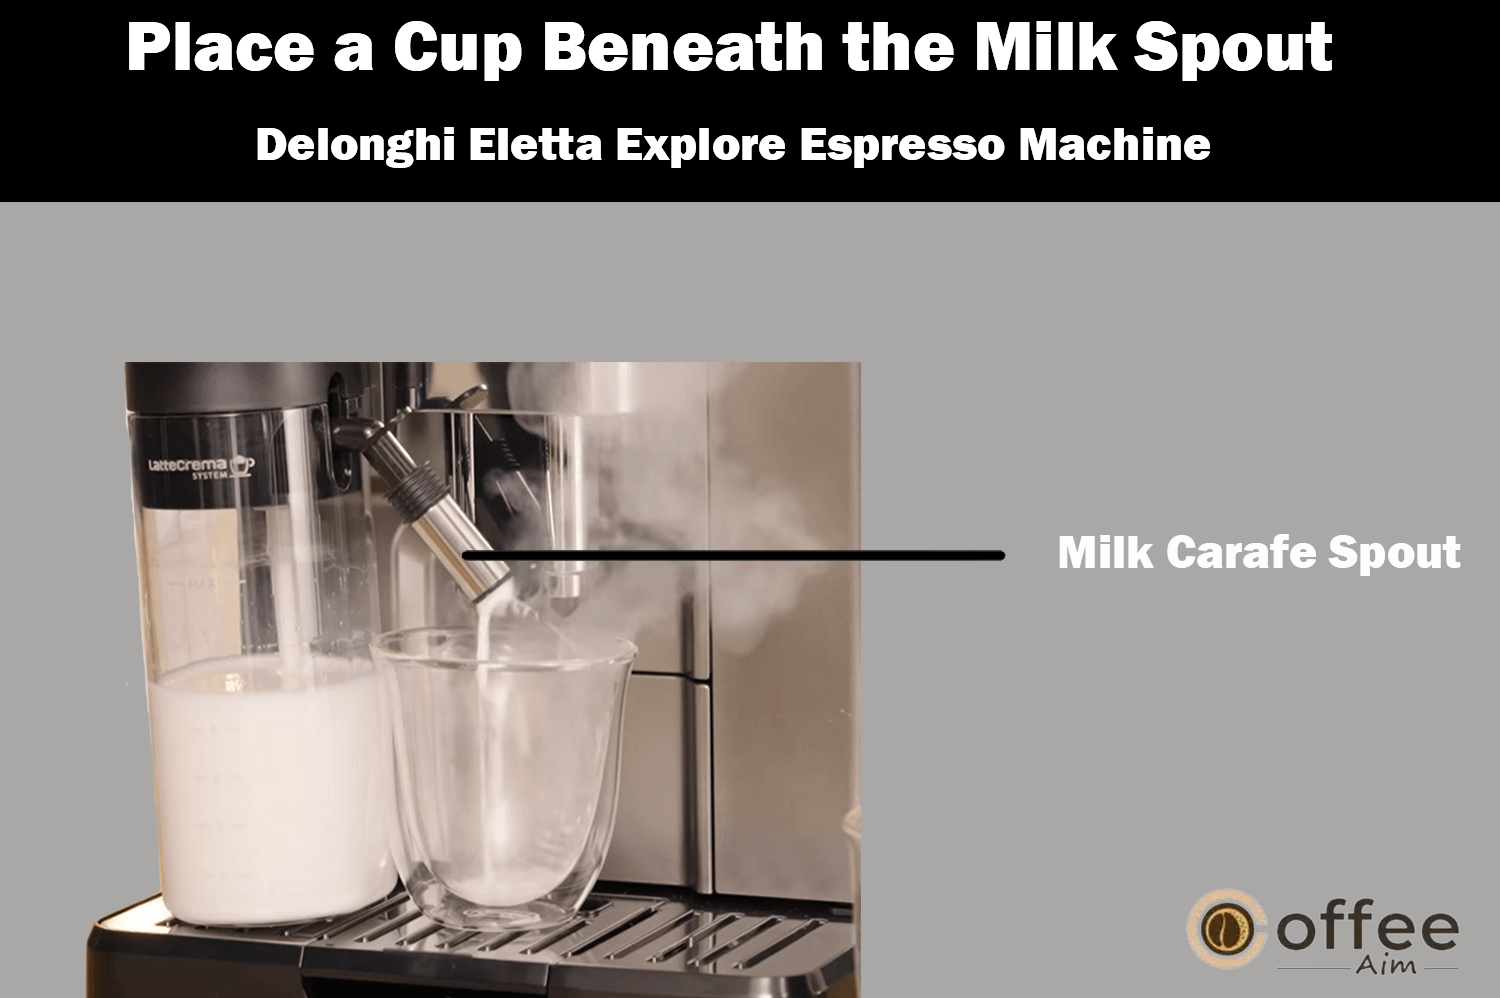 "The image illustrates placing a cup directly under the milk spout of the "Delonghi Eletta Explore Espresso Machine," a crucial step detailed in the article "How to Use the Delonghi Eletta Explore Espresso Machine."